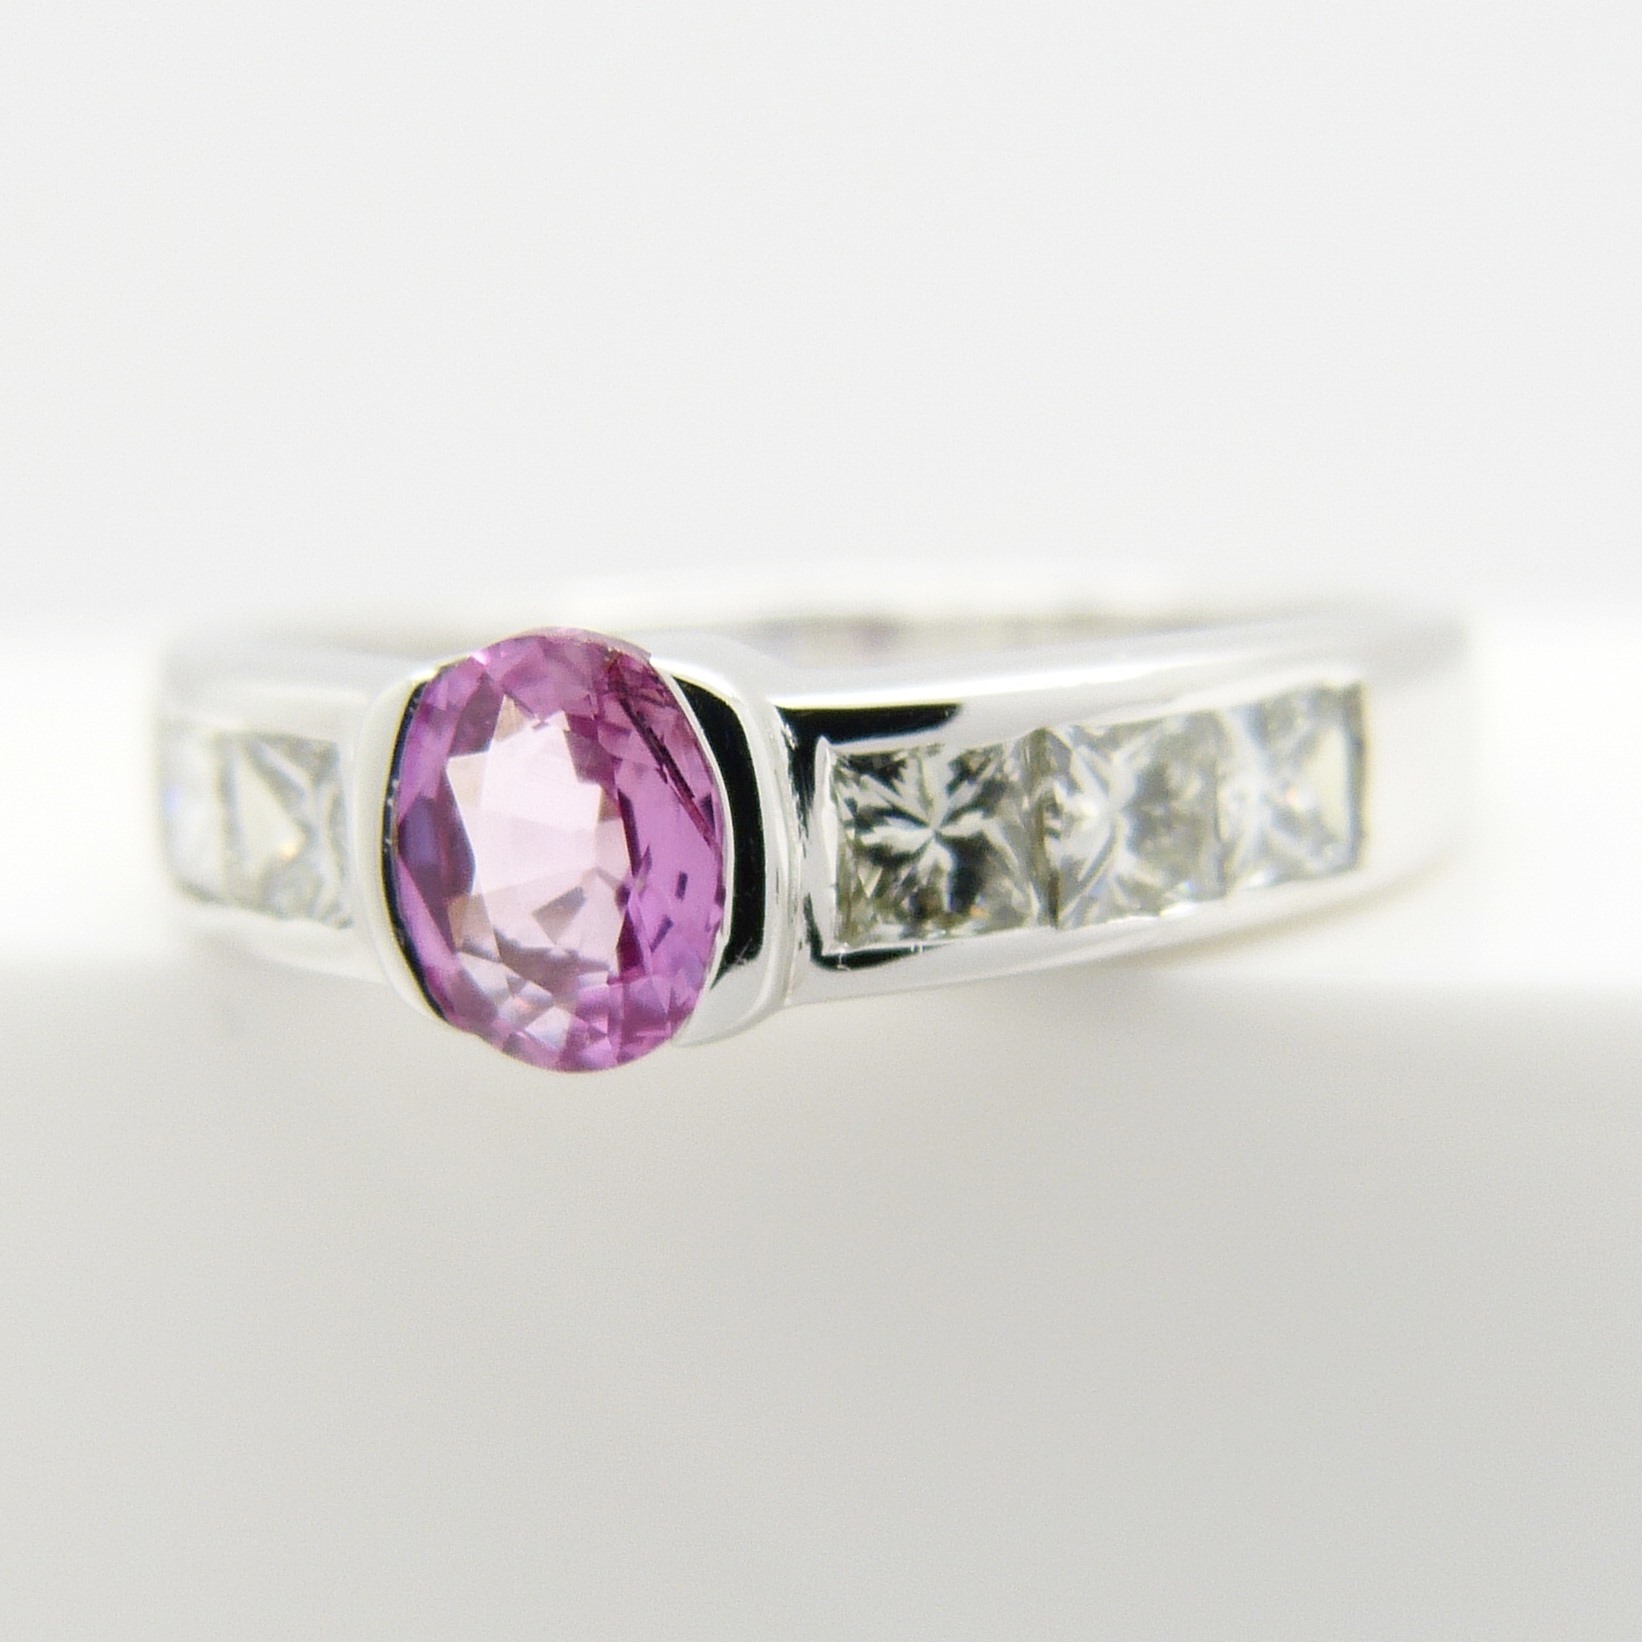 A pink Sapphire gemstone and princess-cut Diamond ring in 18ct white Gold - Image 6 of 7